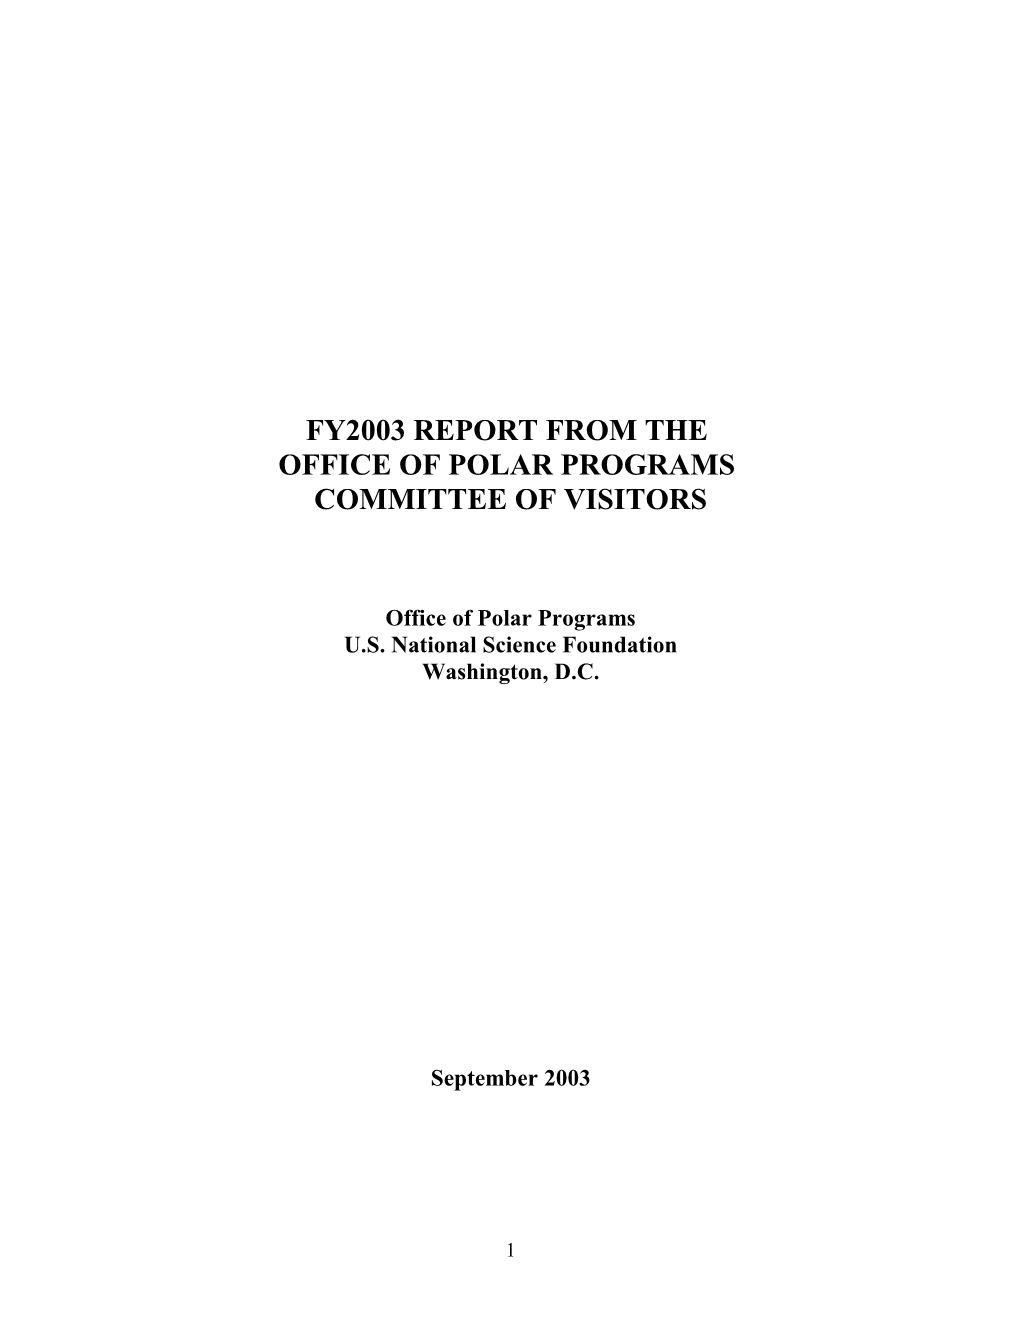 Fy2003 Report from the Office of Polar Programs Committee of Visitors 17-19 September 2003